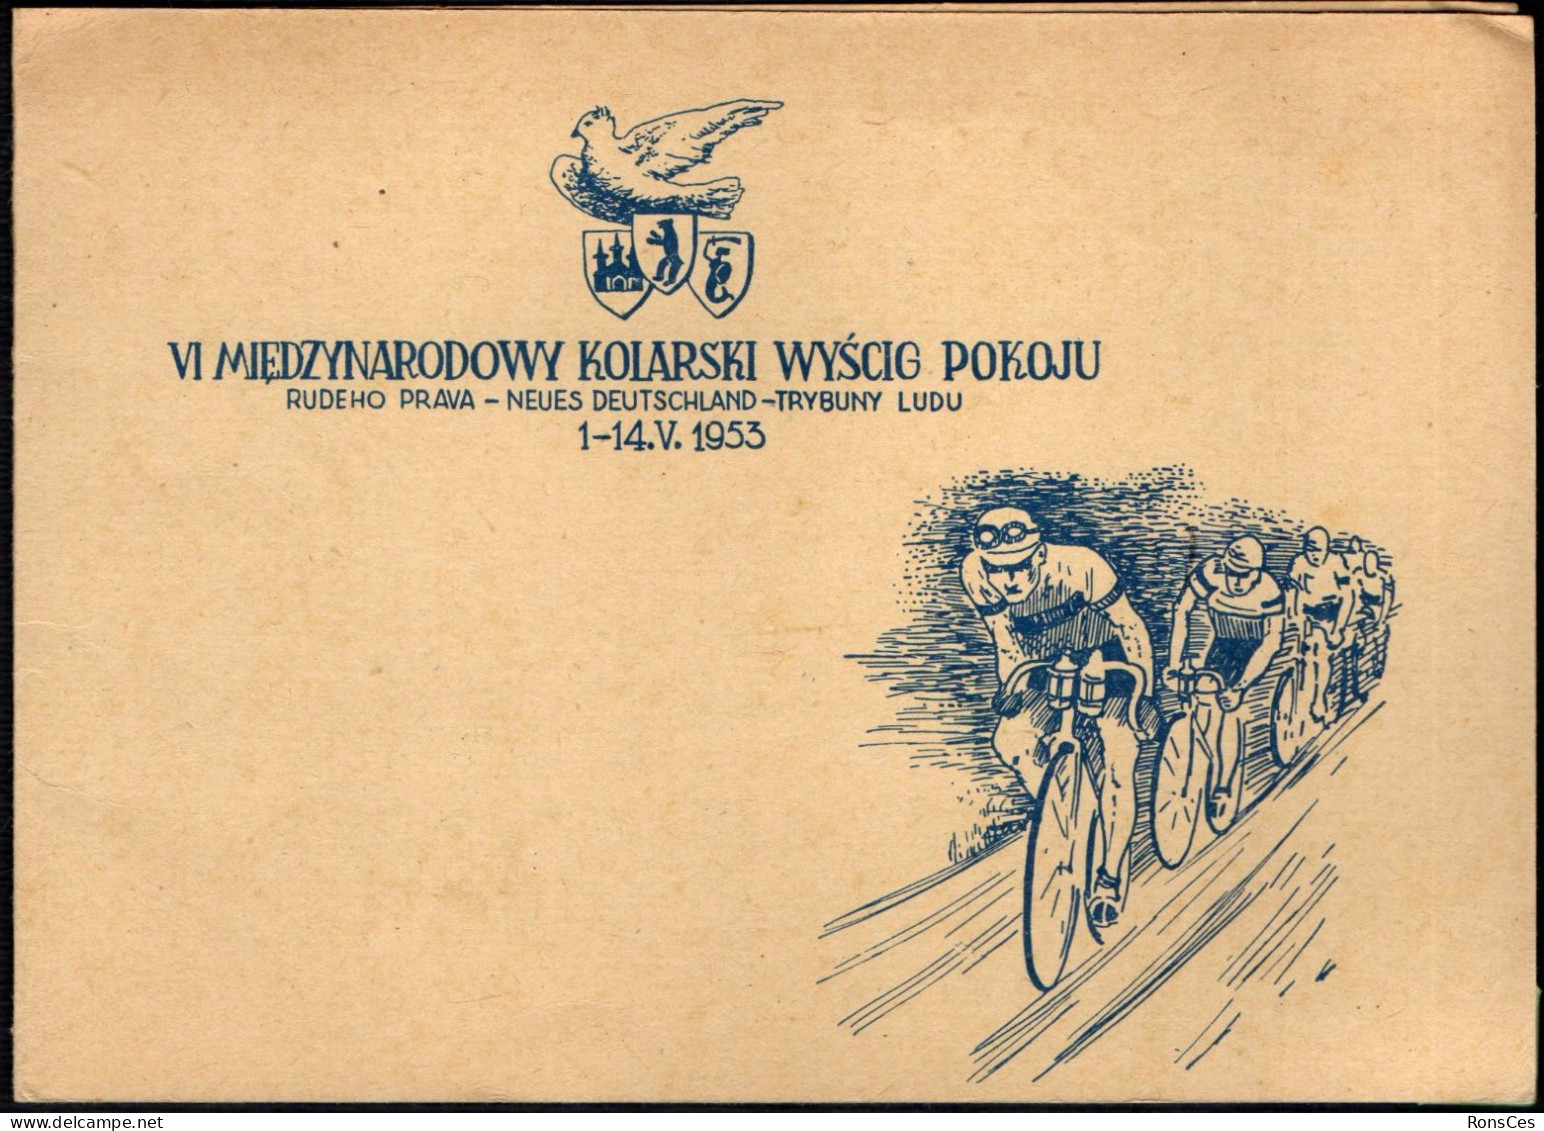 CYCLING - POLAND 1953 - THE INTERNATIONAL CYCLING RACE OF PEACE - SMALL FOLDER - A - Wielrennen